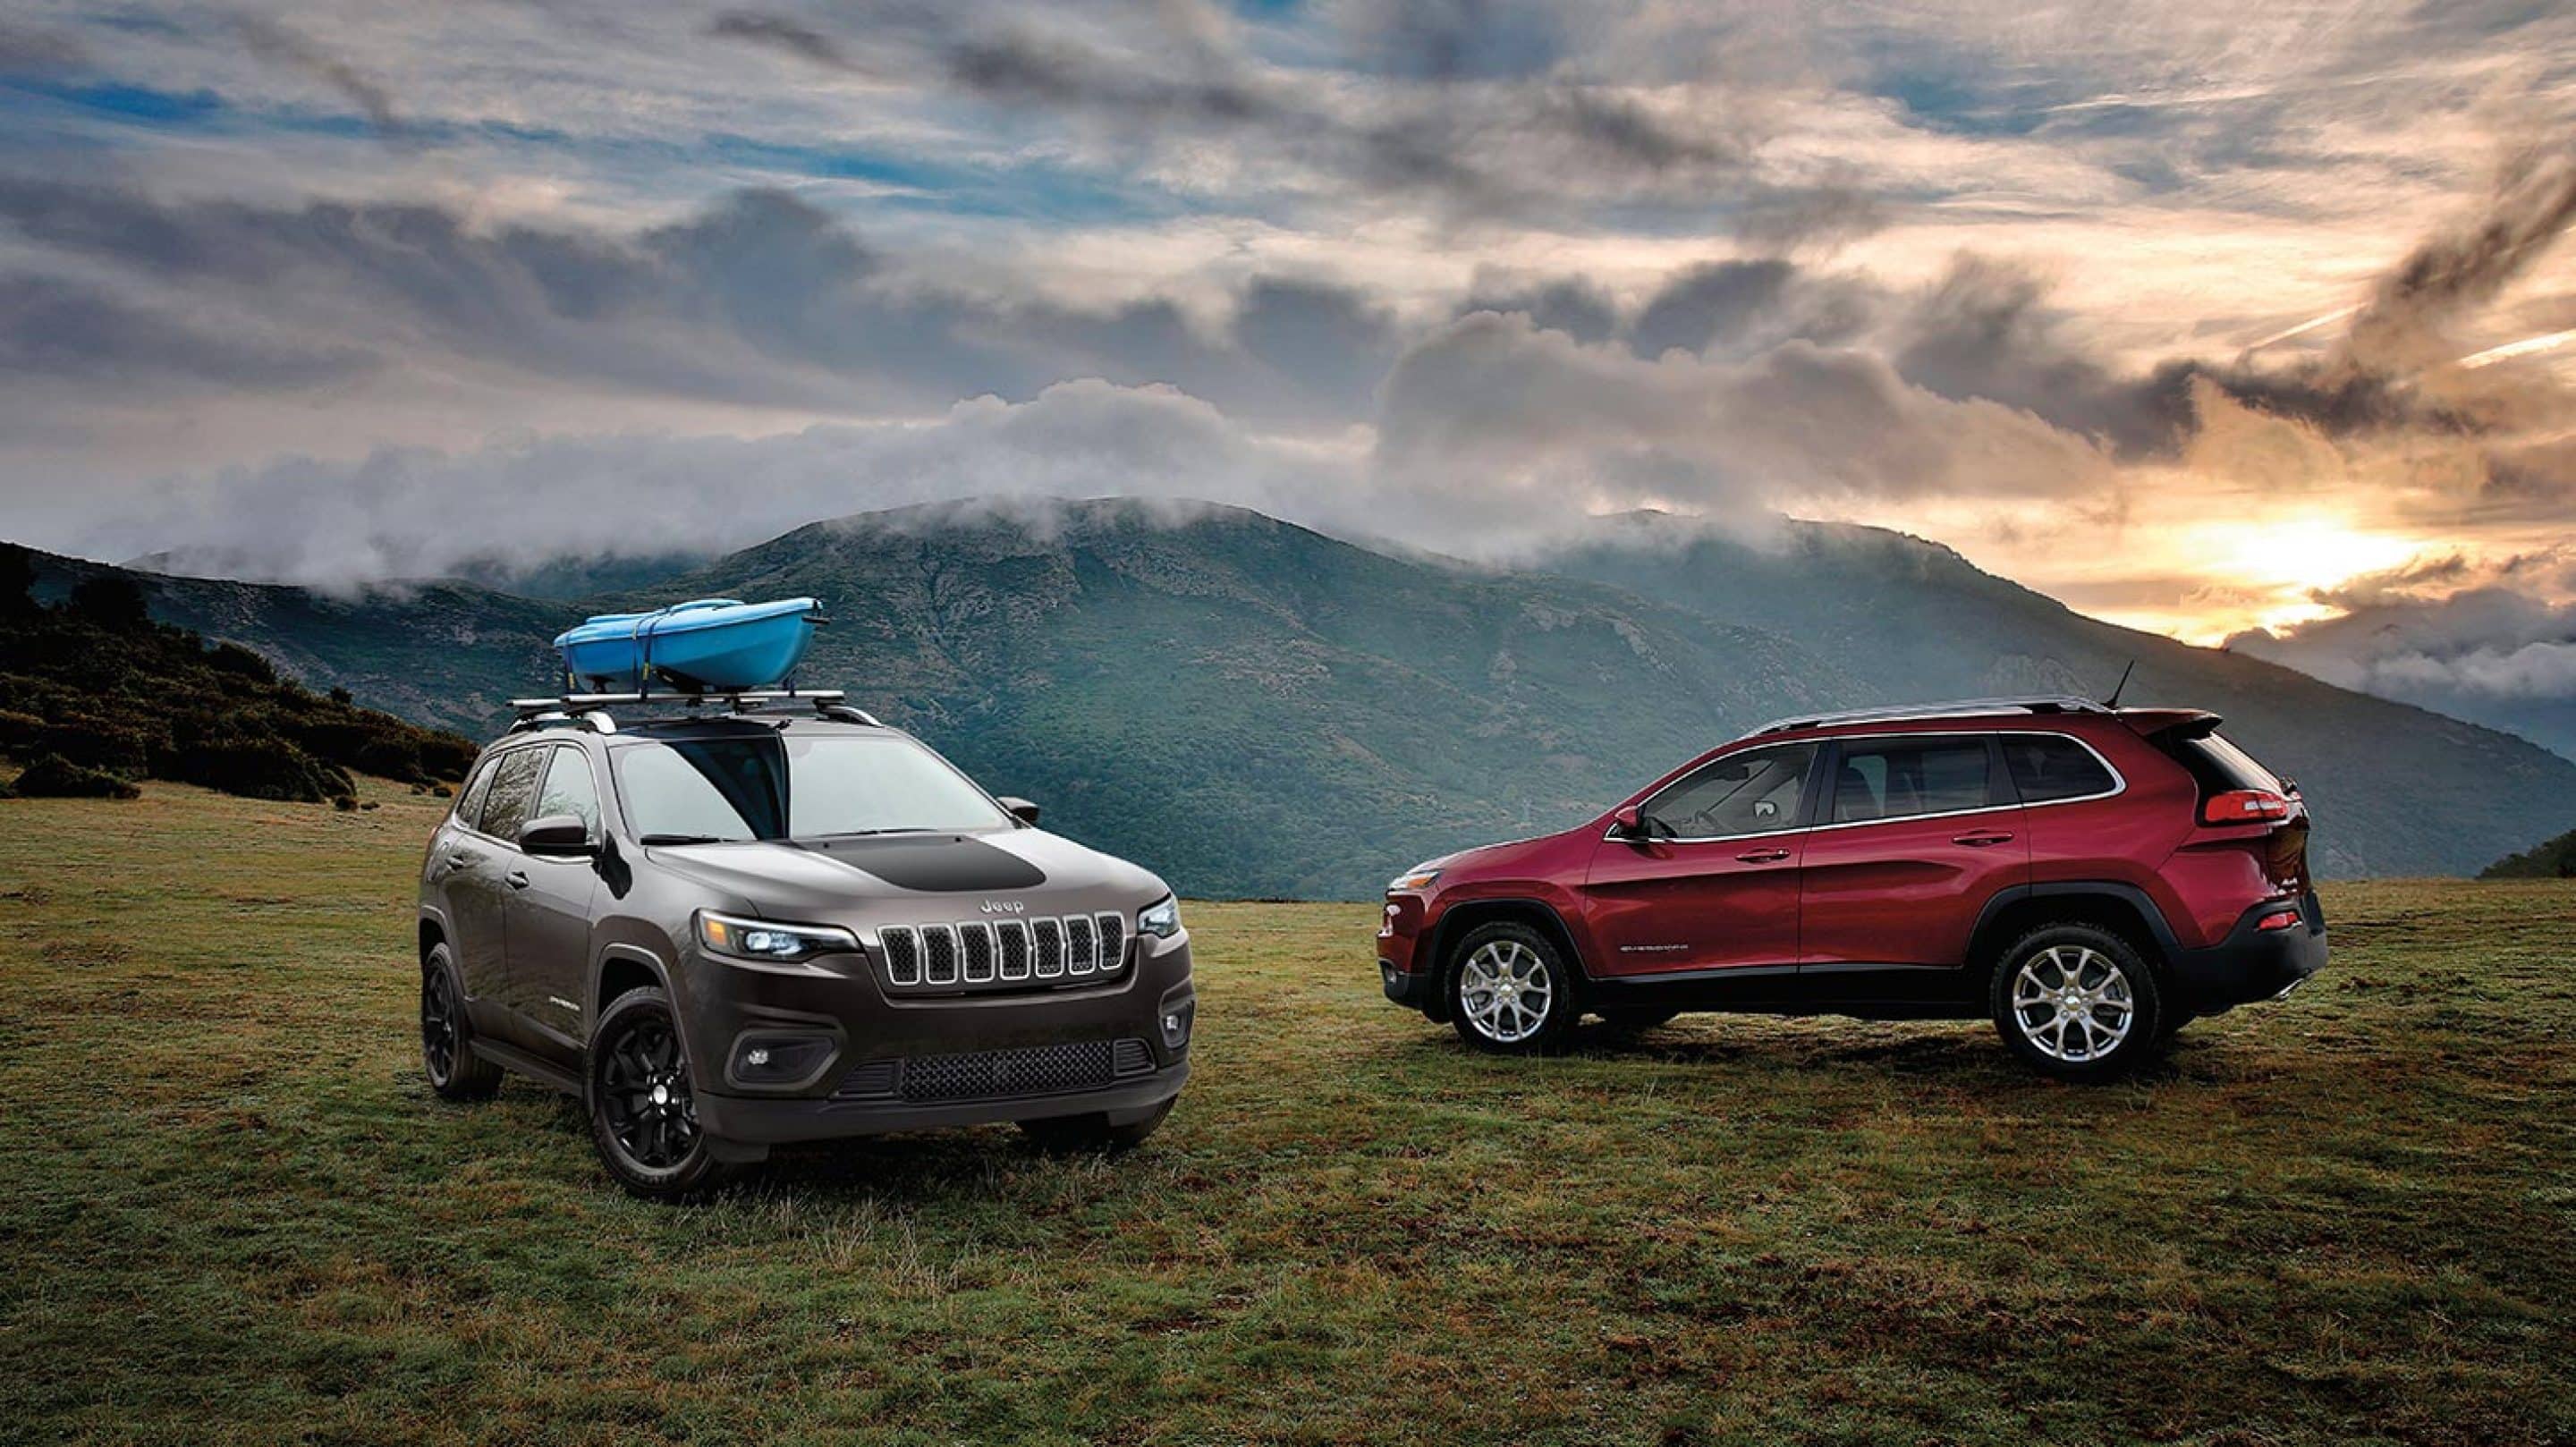 Trim Levels of the 2020 Jeep Cherokee